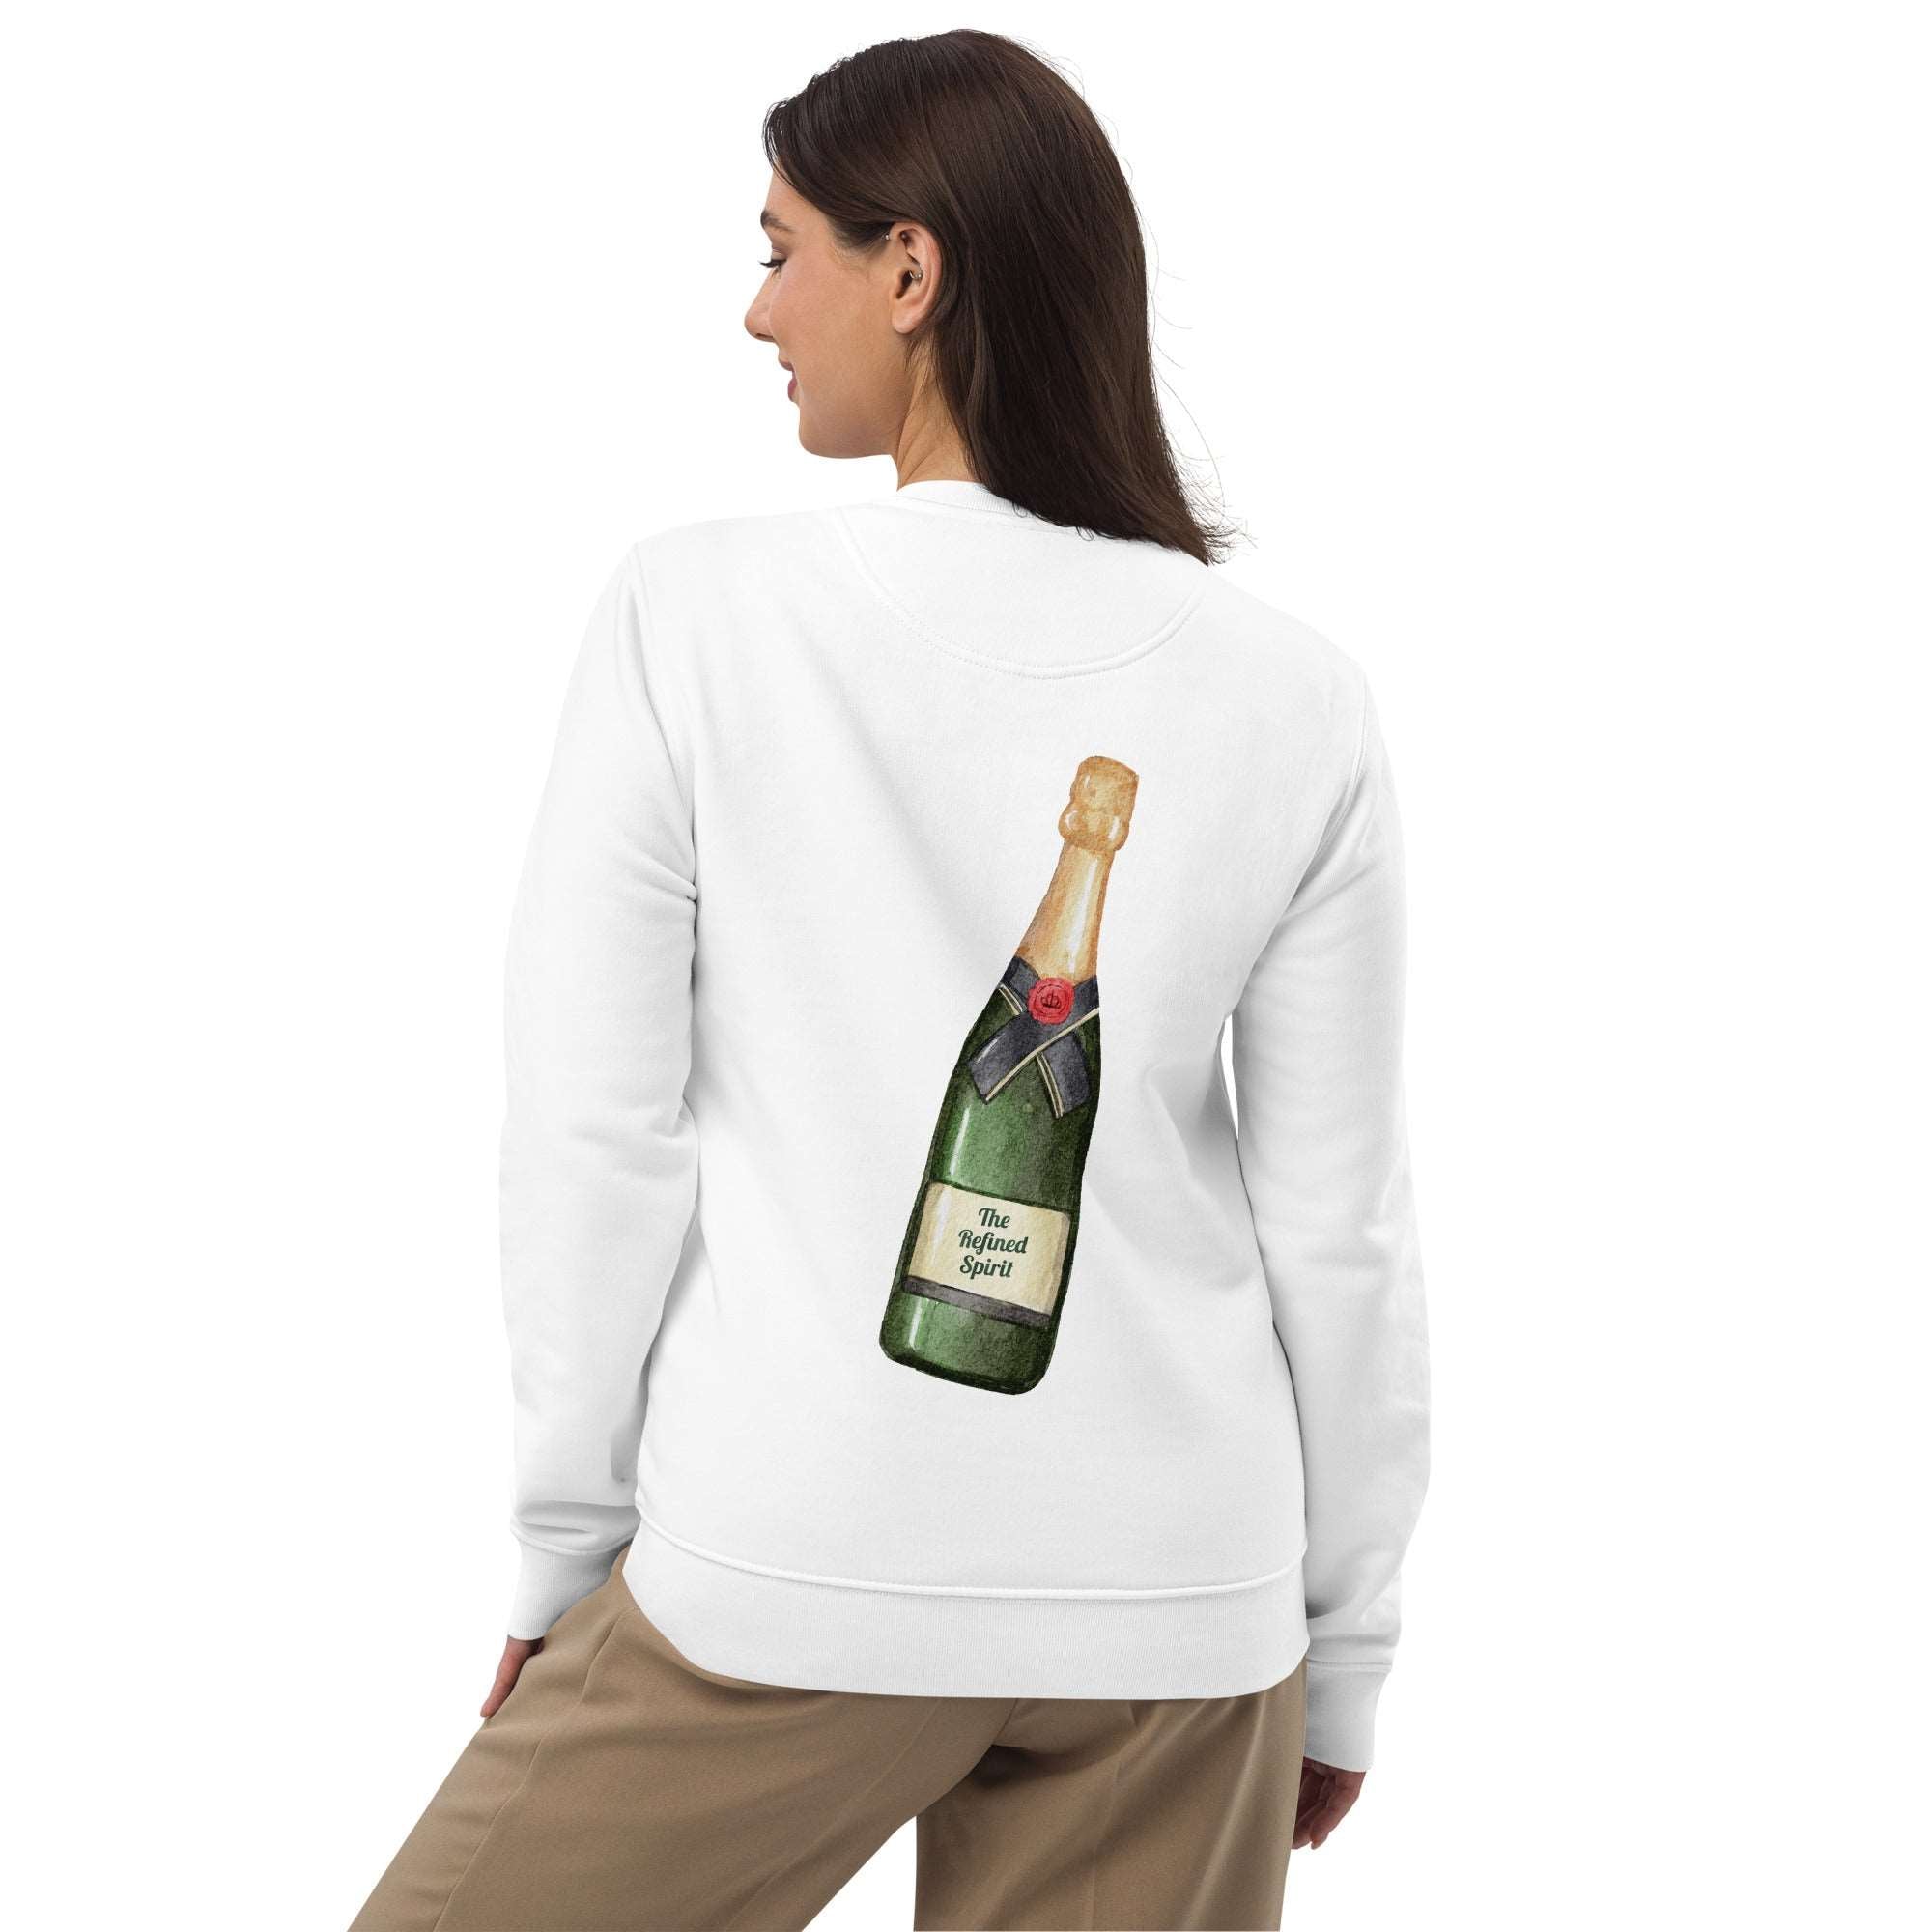 The Champagne Club - Organic Embroidered Sweatshirt - The Refined Spirit